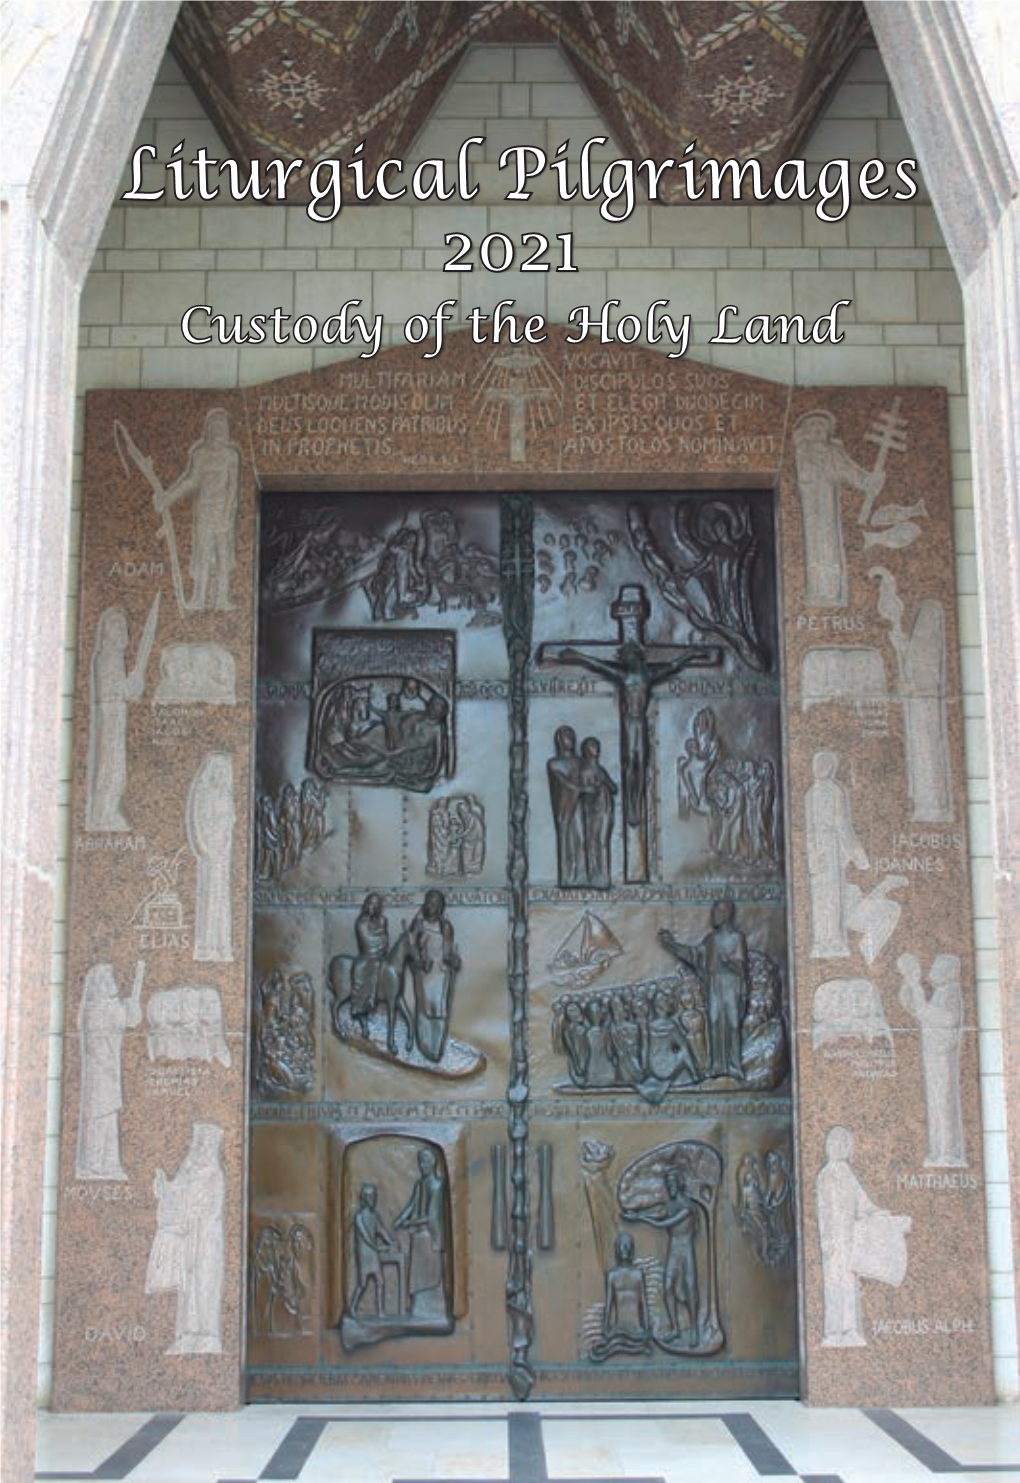 Liturgical Pilgrimages 2021 Custody of the Holy Land Cover and Interior Photos: the Photographs (From E